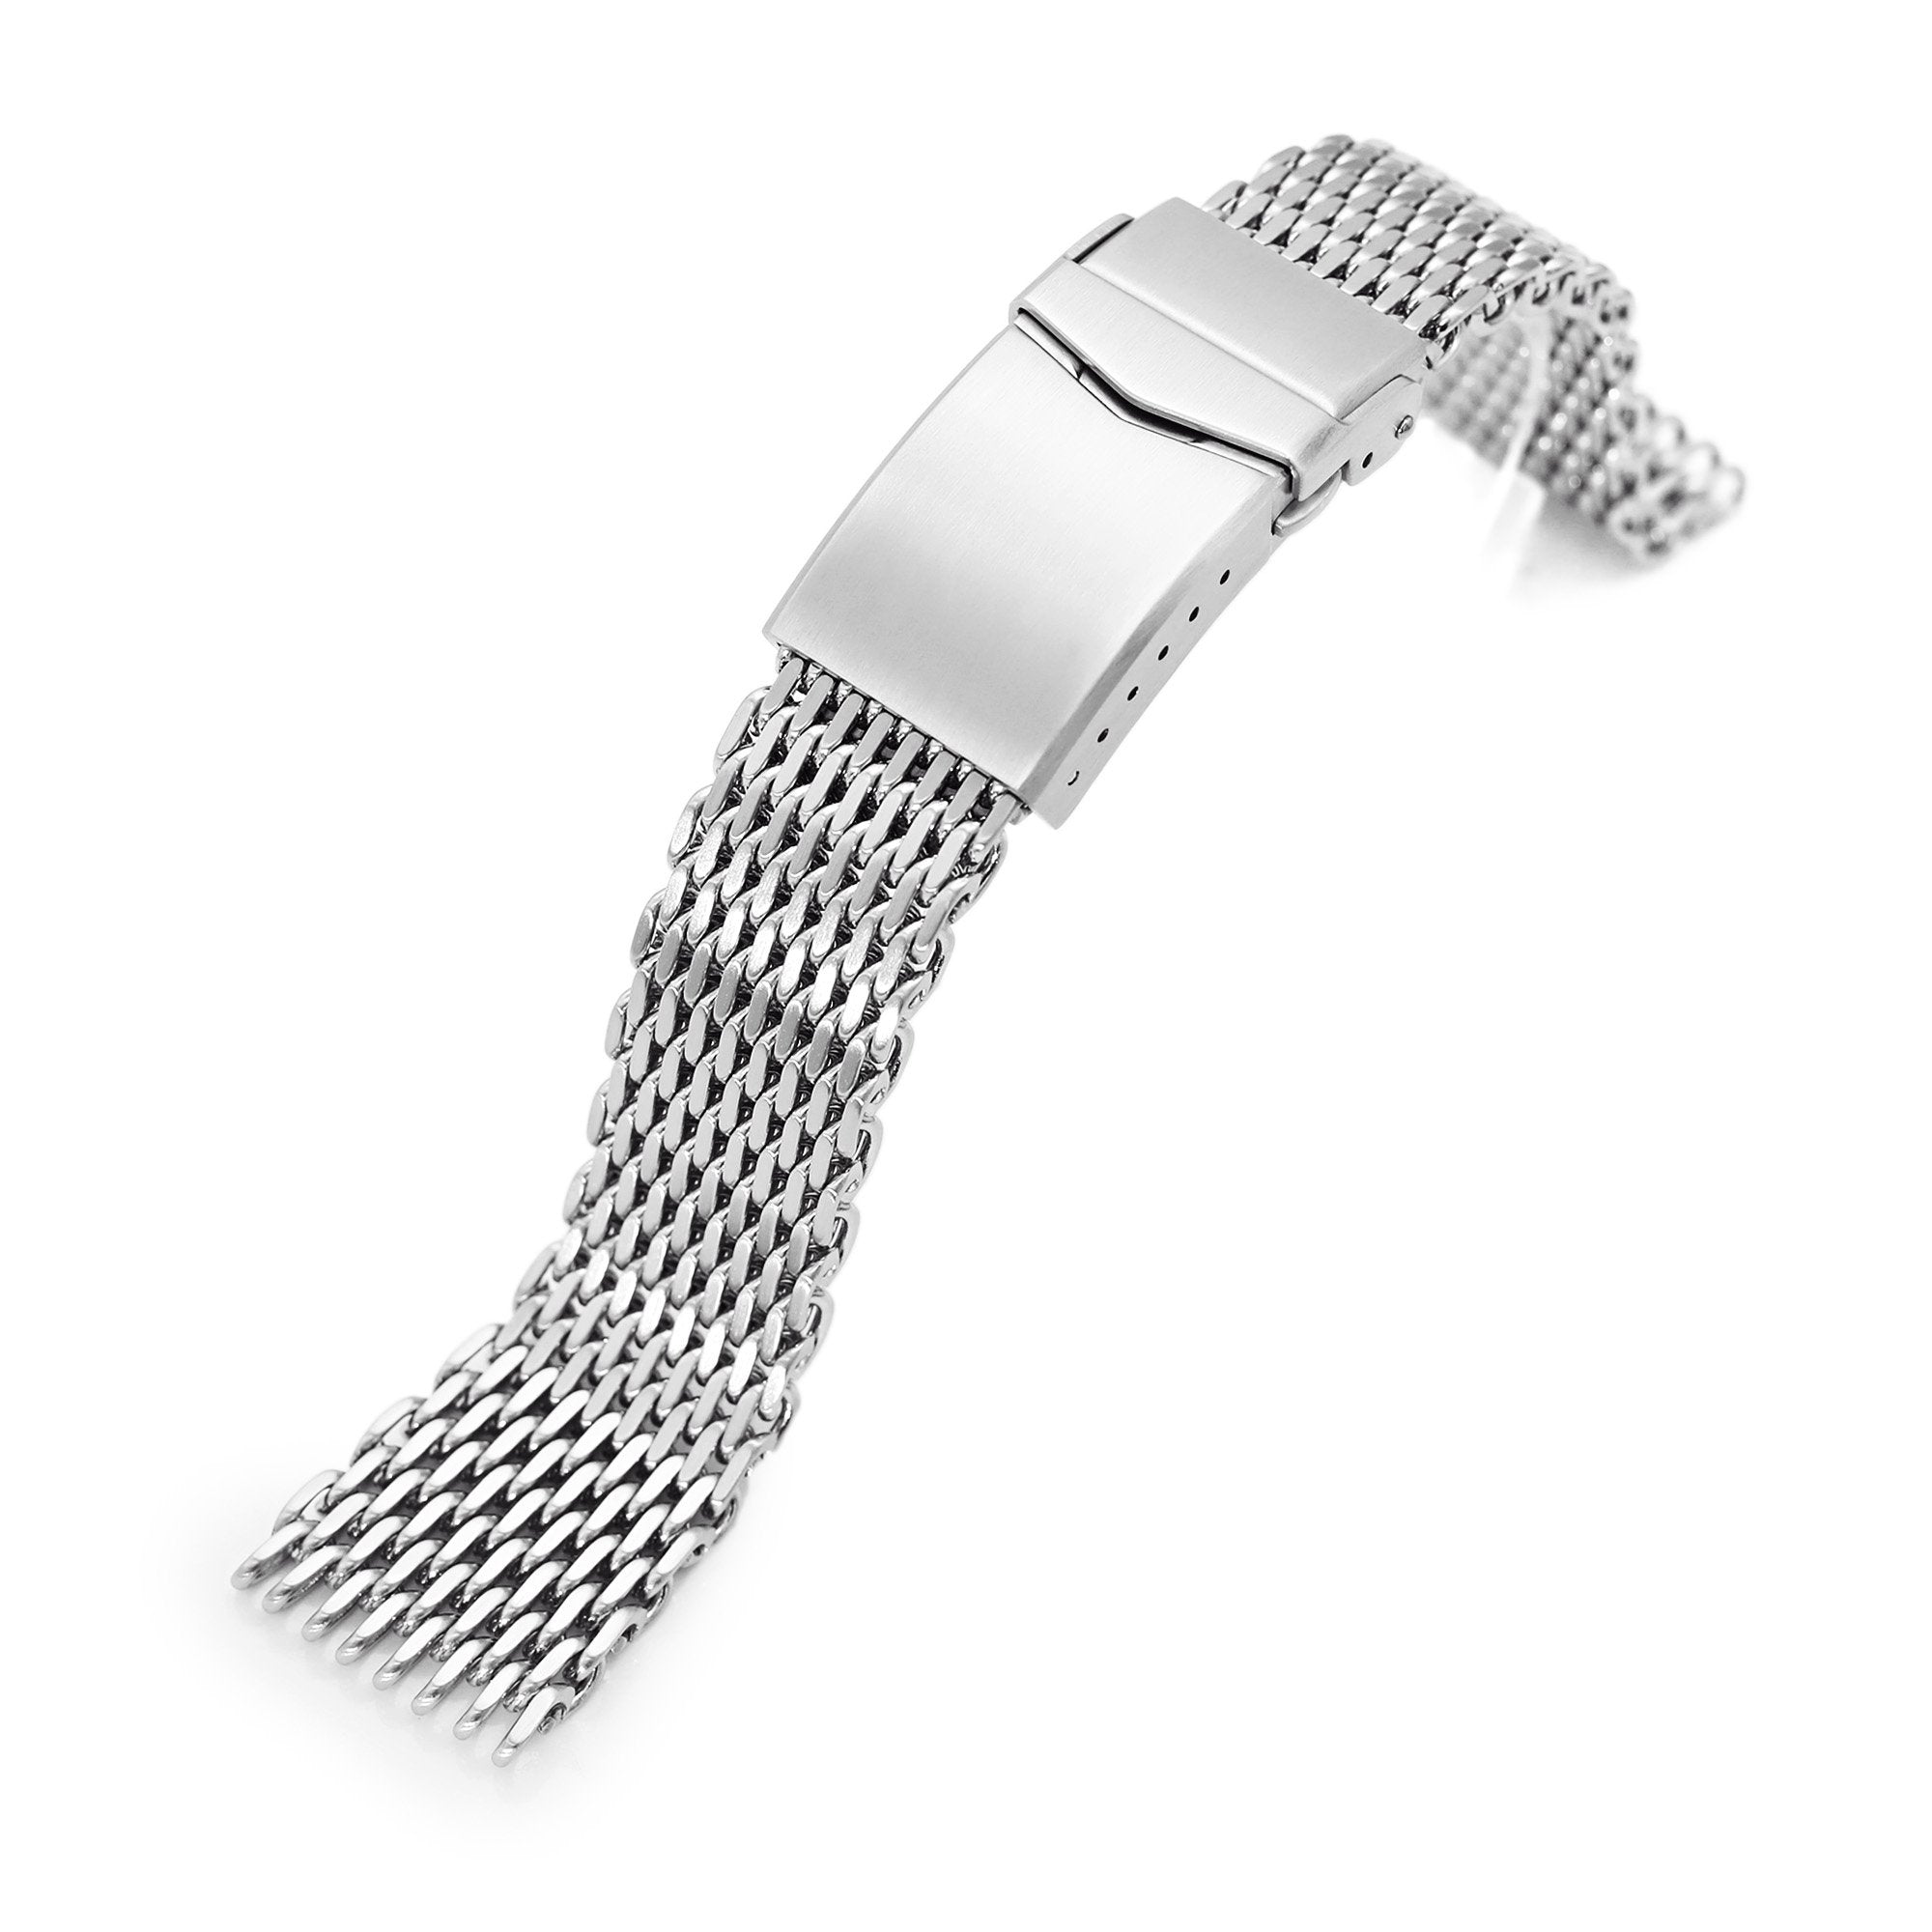 20mm Tapered "SHARK" Mesh Band Stainless Steel Watch Bracelet V-Clasp Polished Strapcode Watch Bands